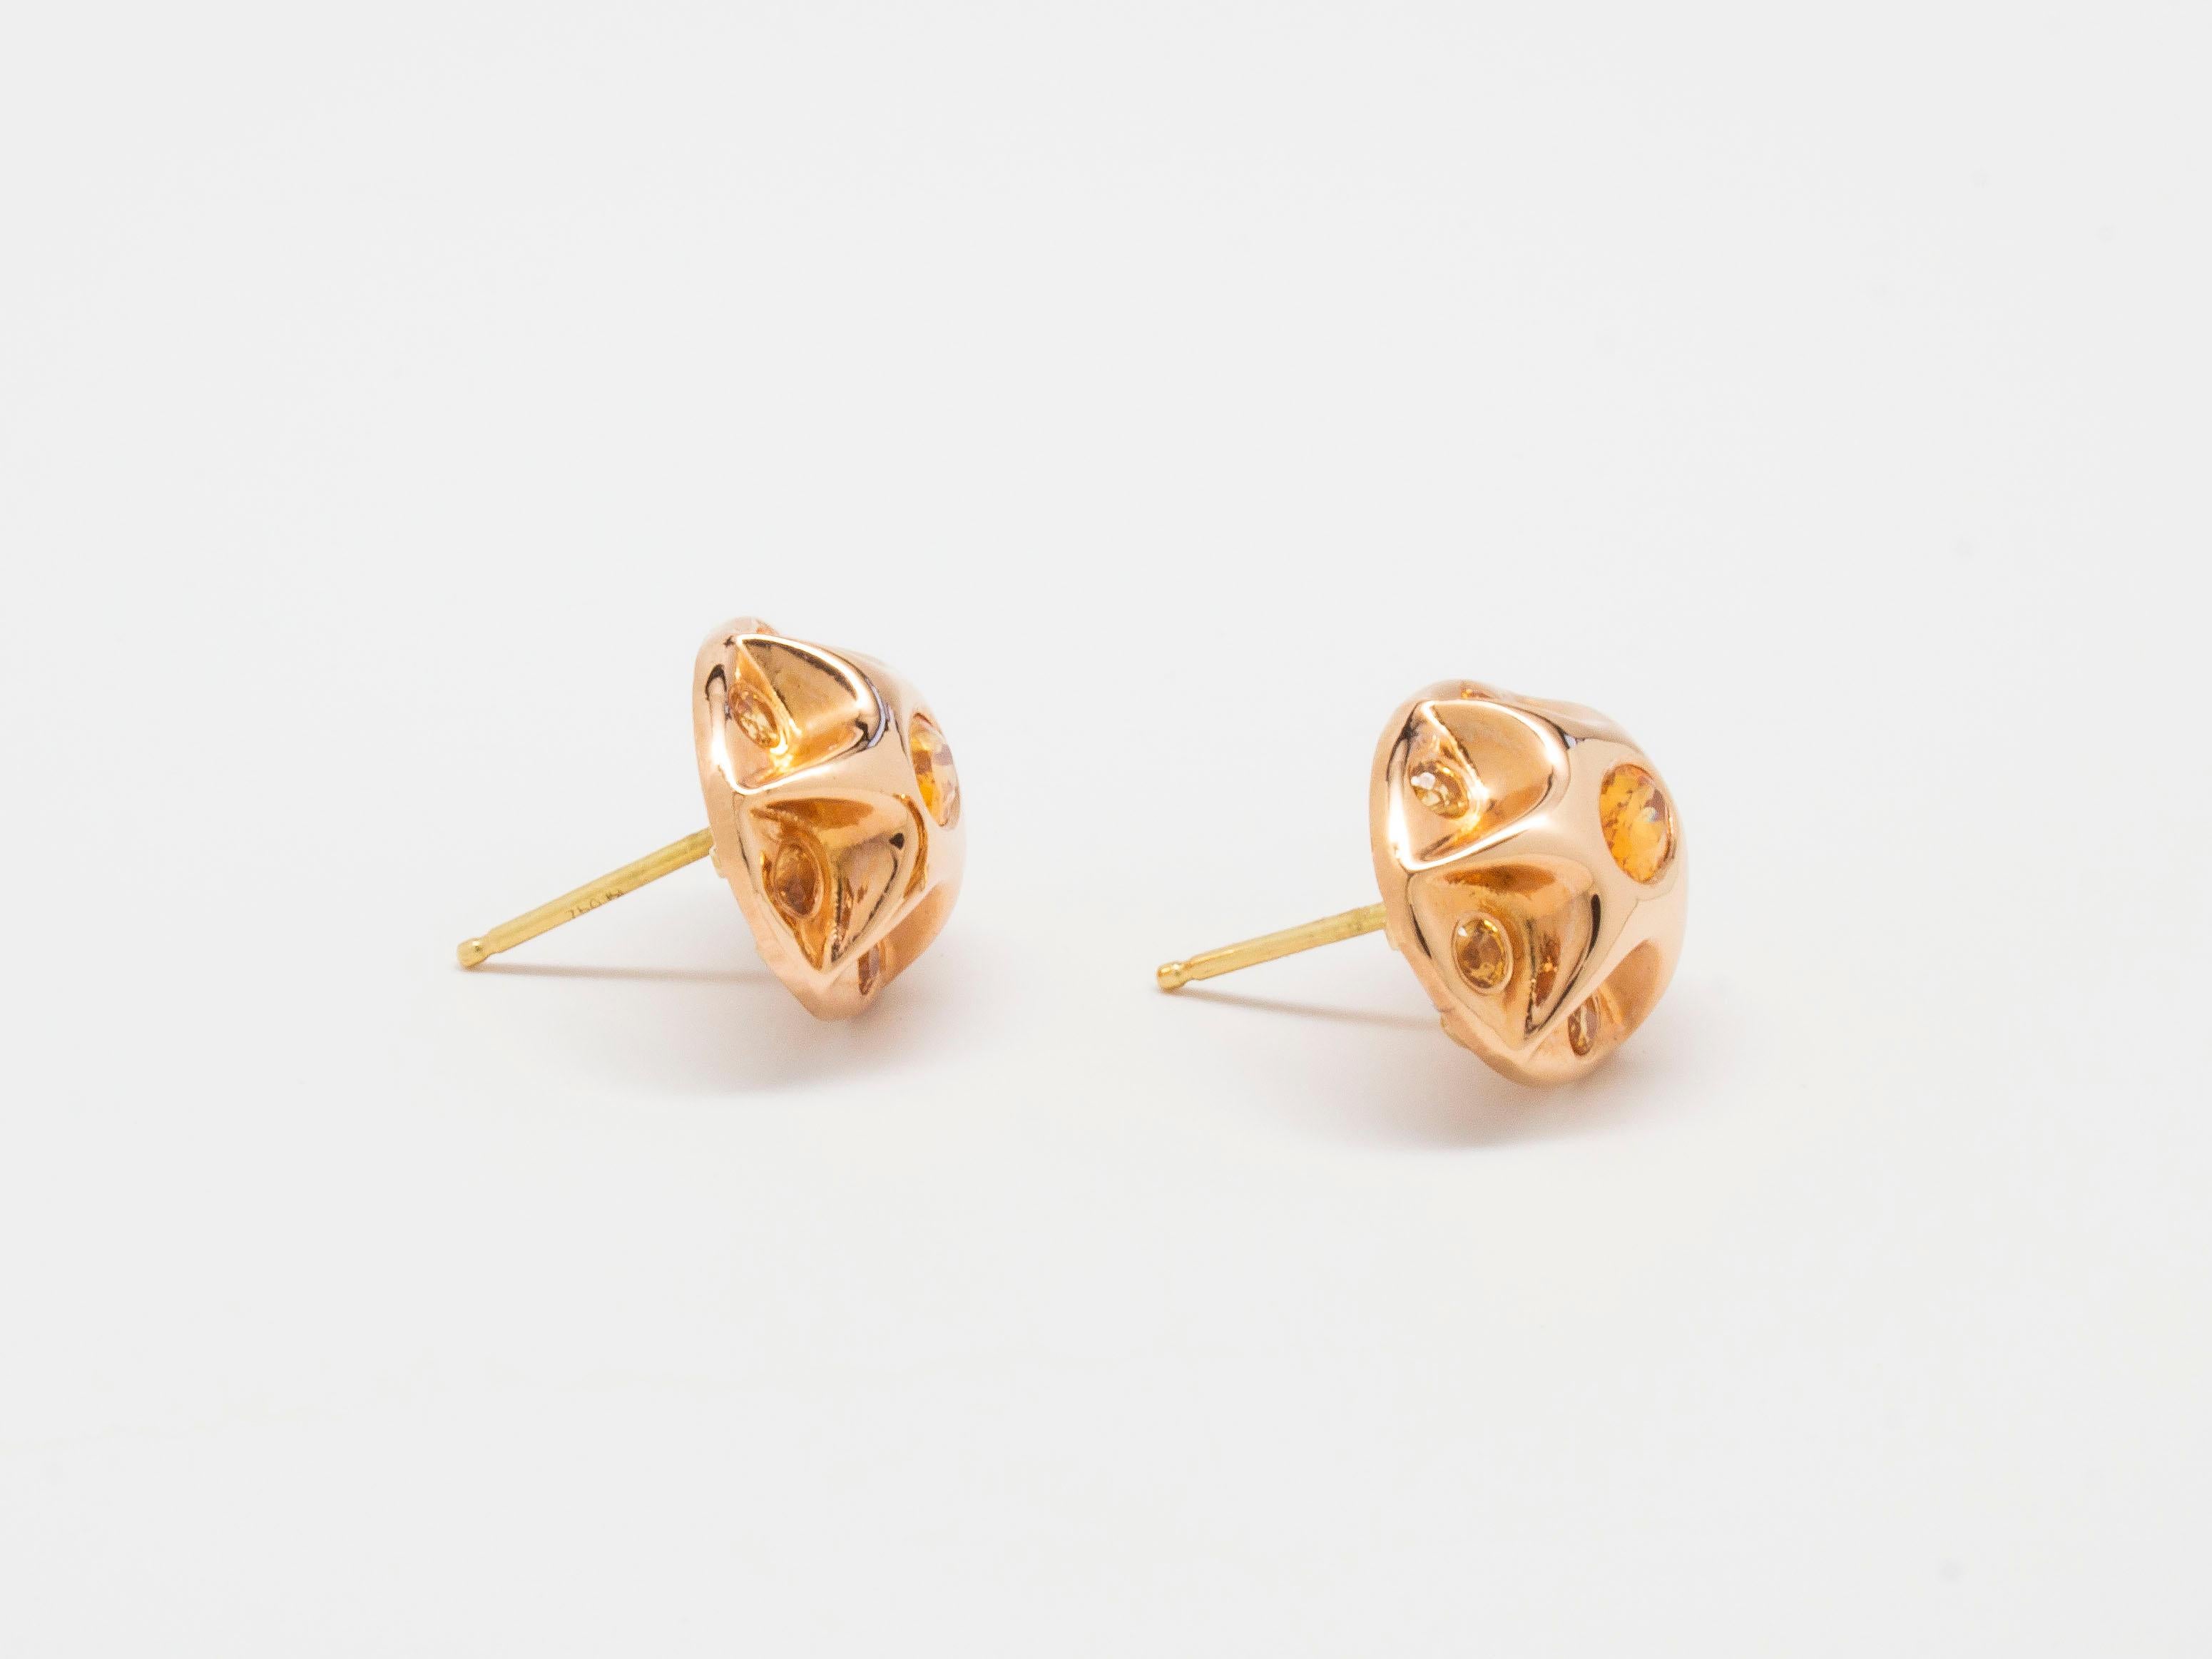 The Sagan Stud Earrings with Mandarin Garnet from modern fine jewelry house, Baker & Black. Electric garnets the color of tangerines are paired with rose gold in these 1950's style button earrings featuring Baker & Black's signature astral shape.